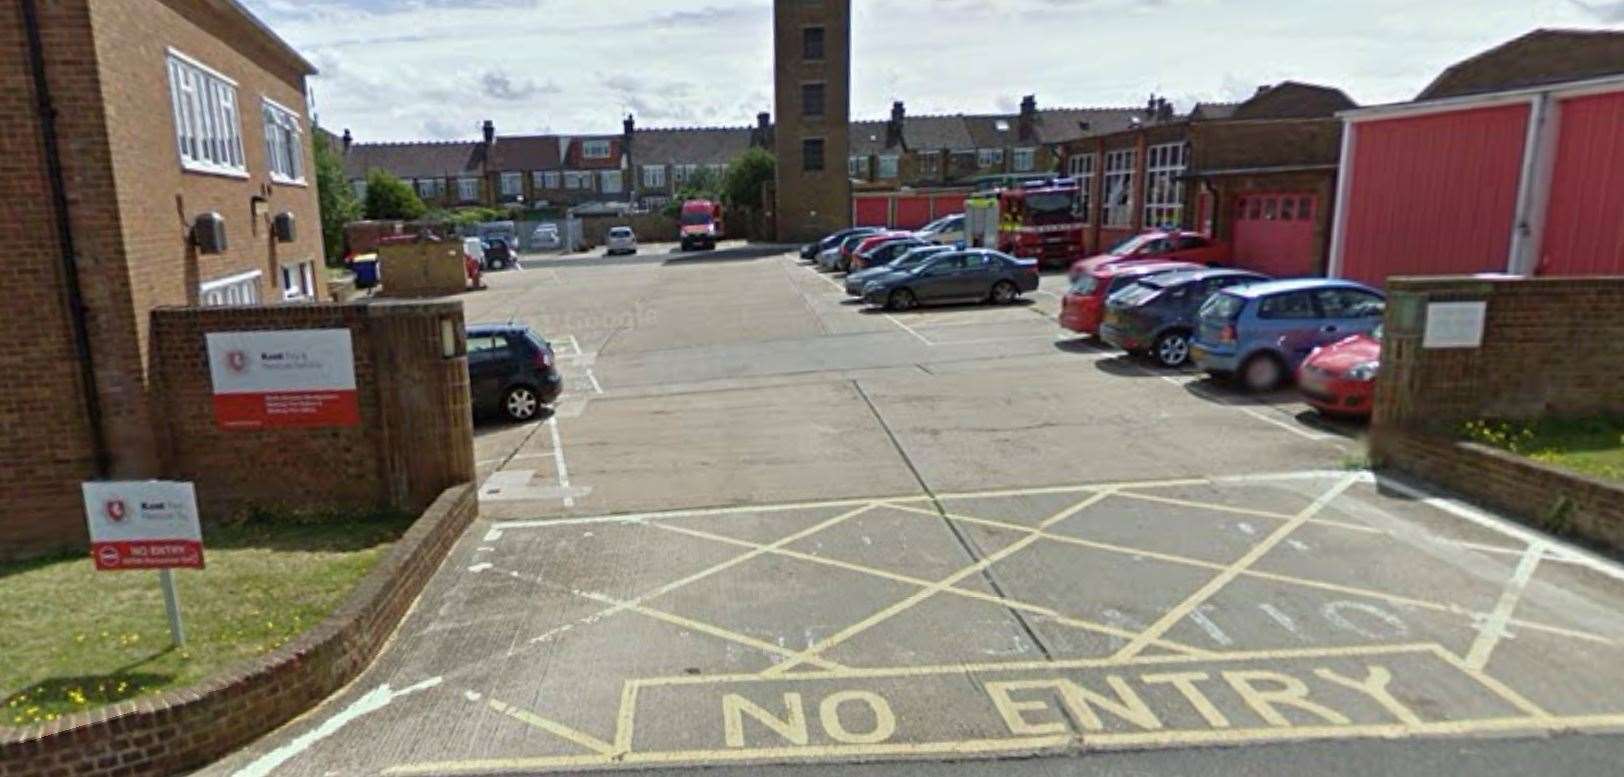 The former Medway Fire Station before it shut in 2017. Picture: Google